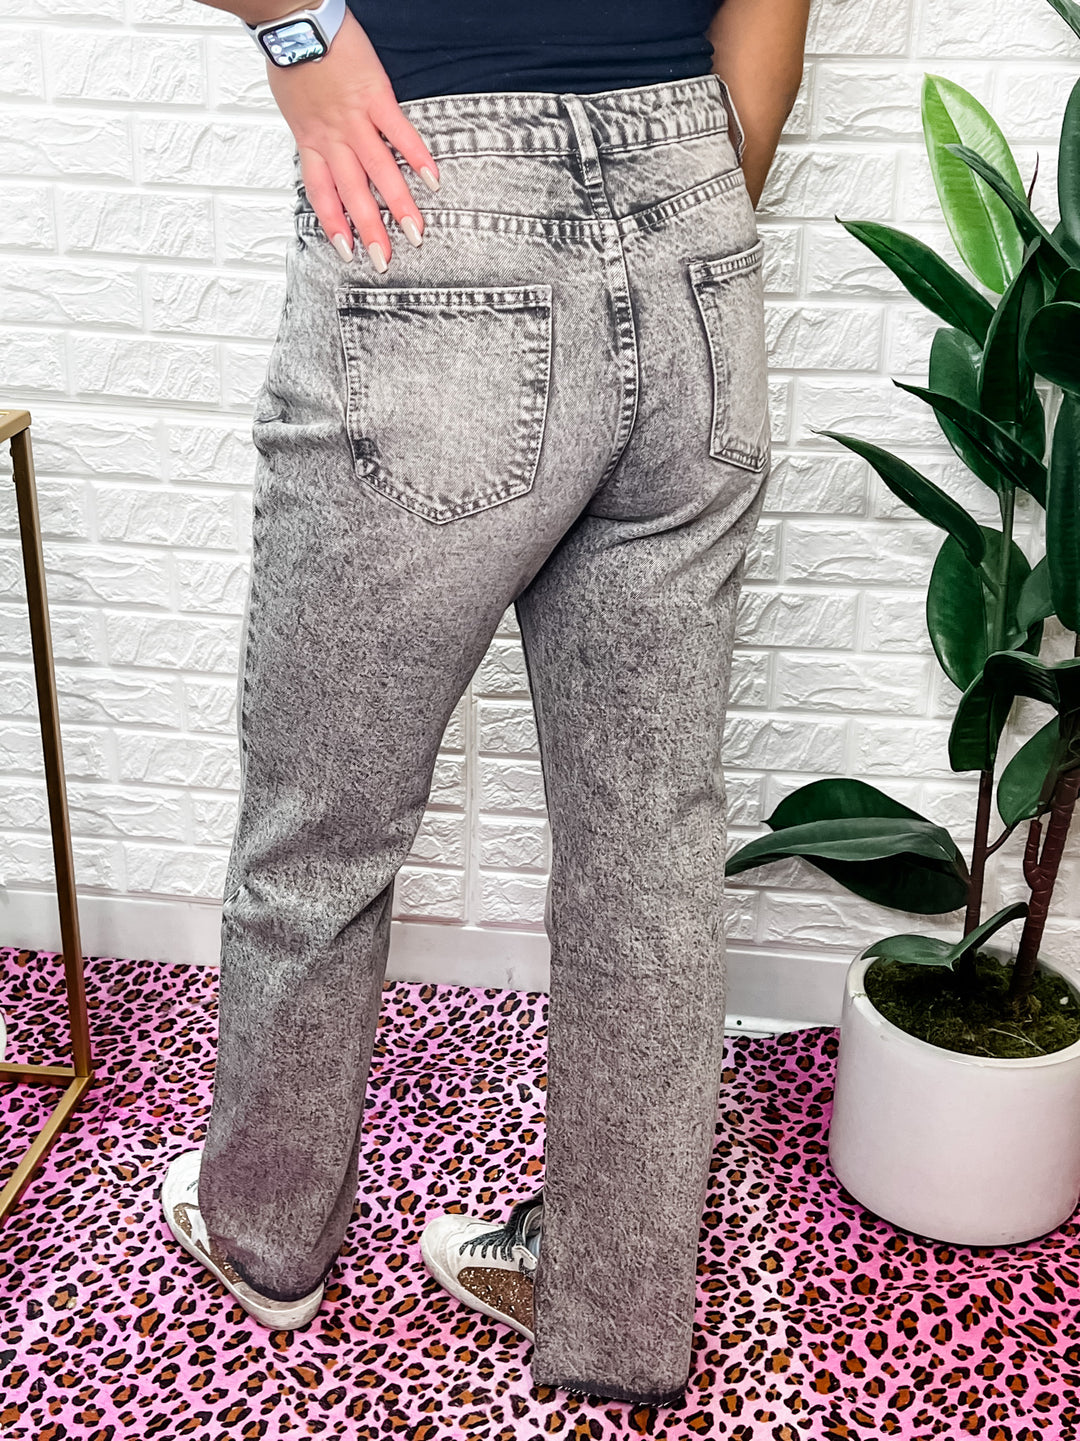 Criss Cross Acid Jeans - The Teal Antler Boutique